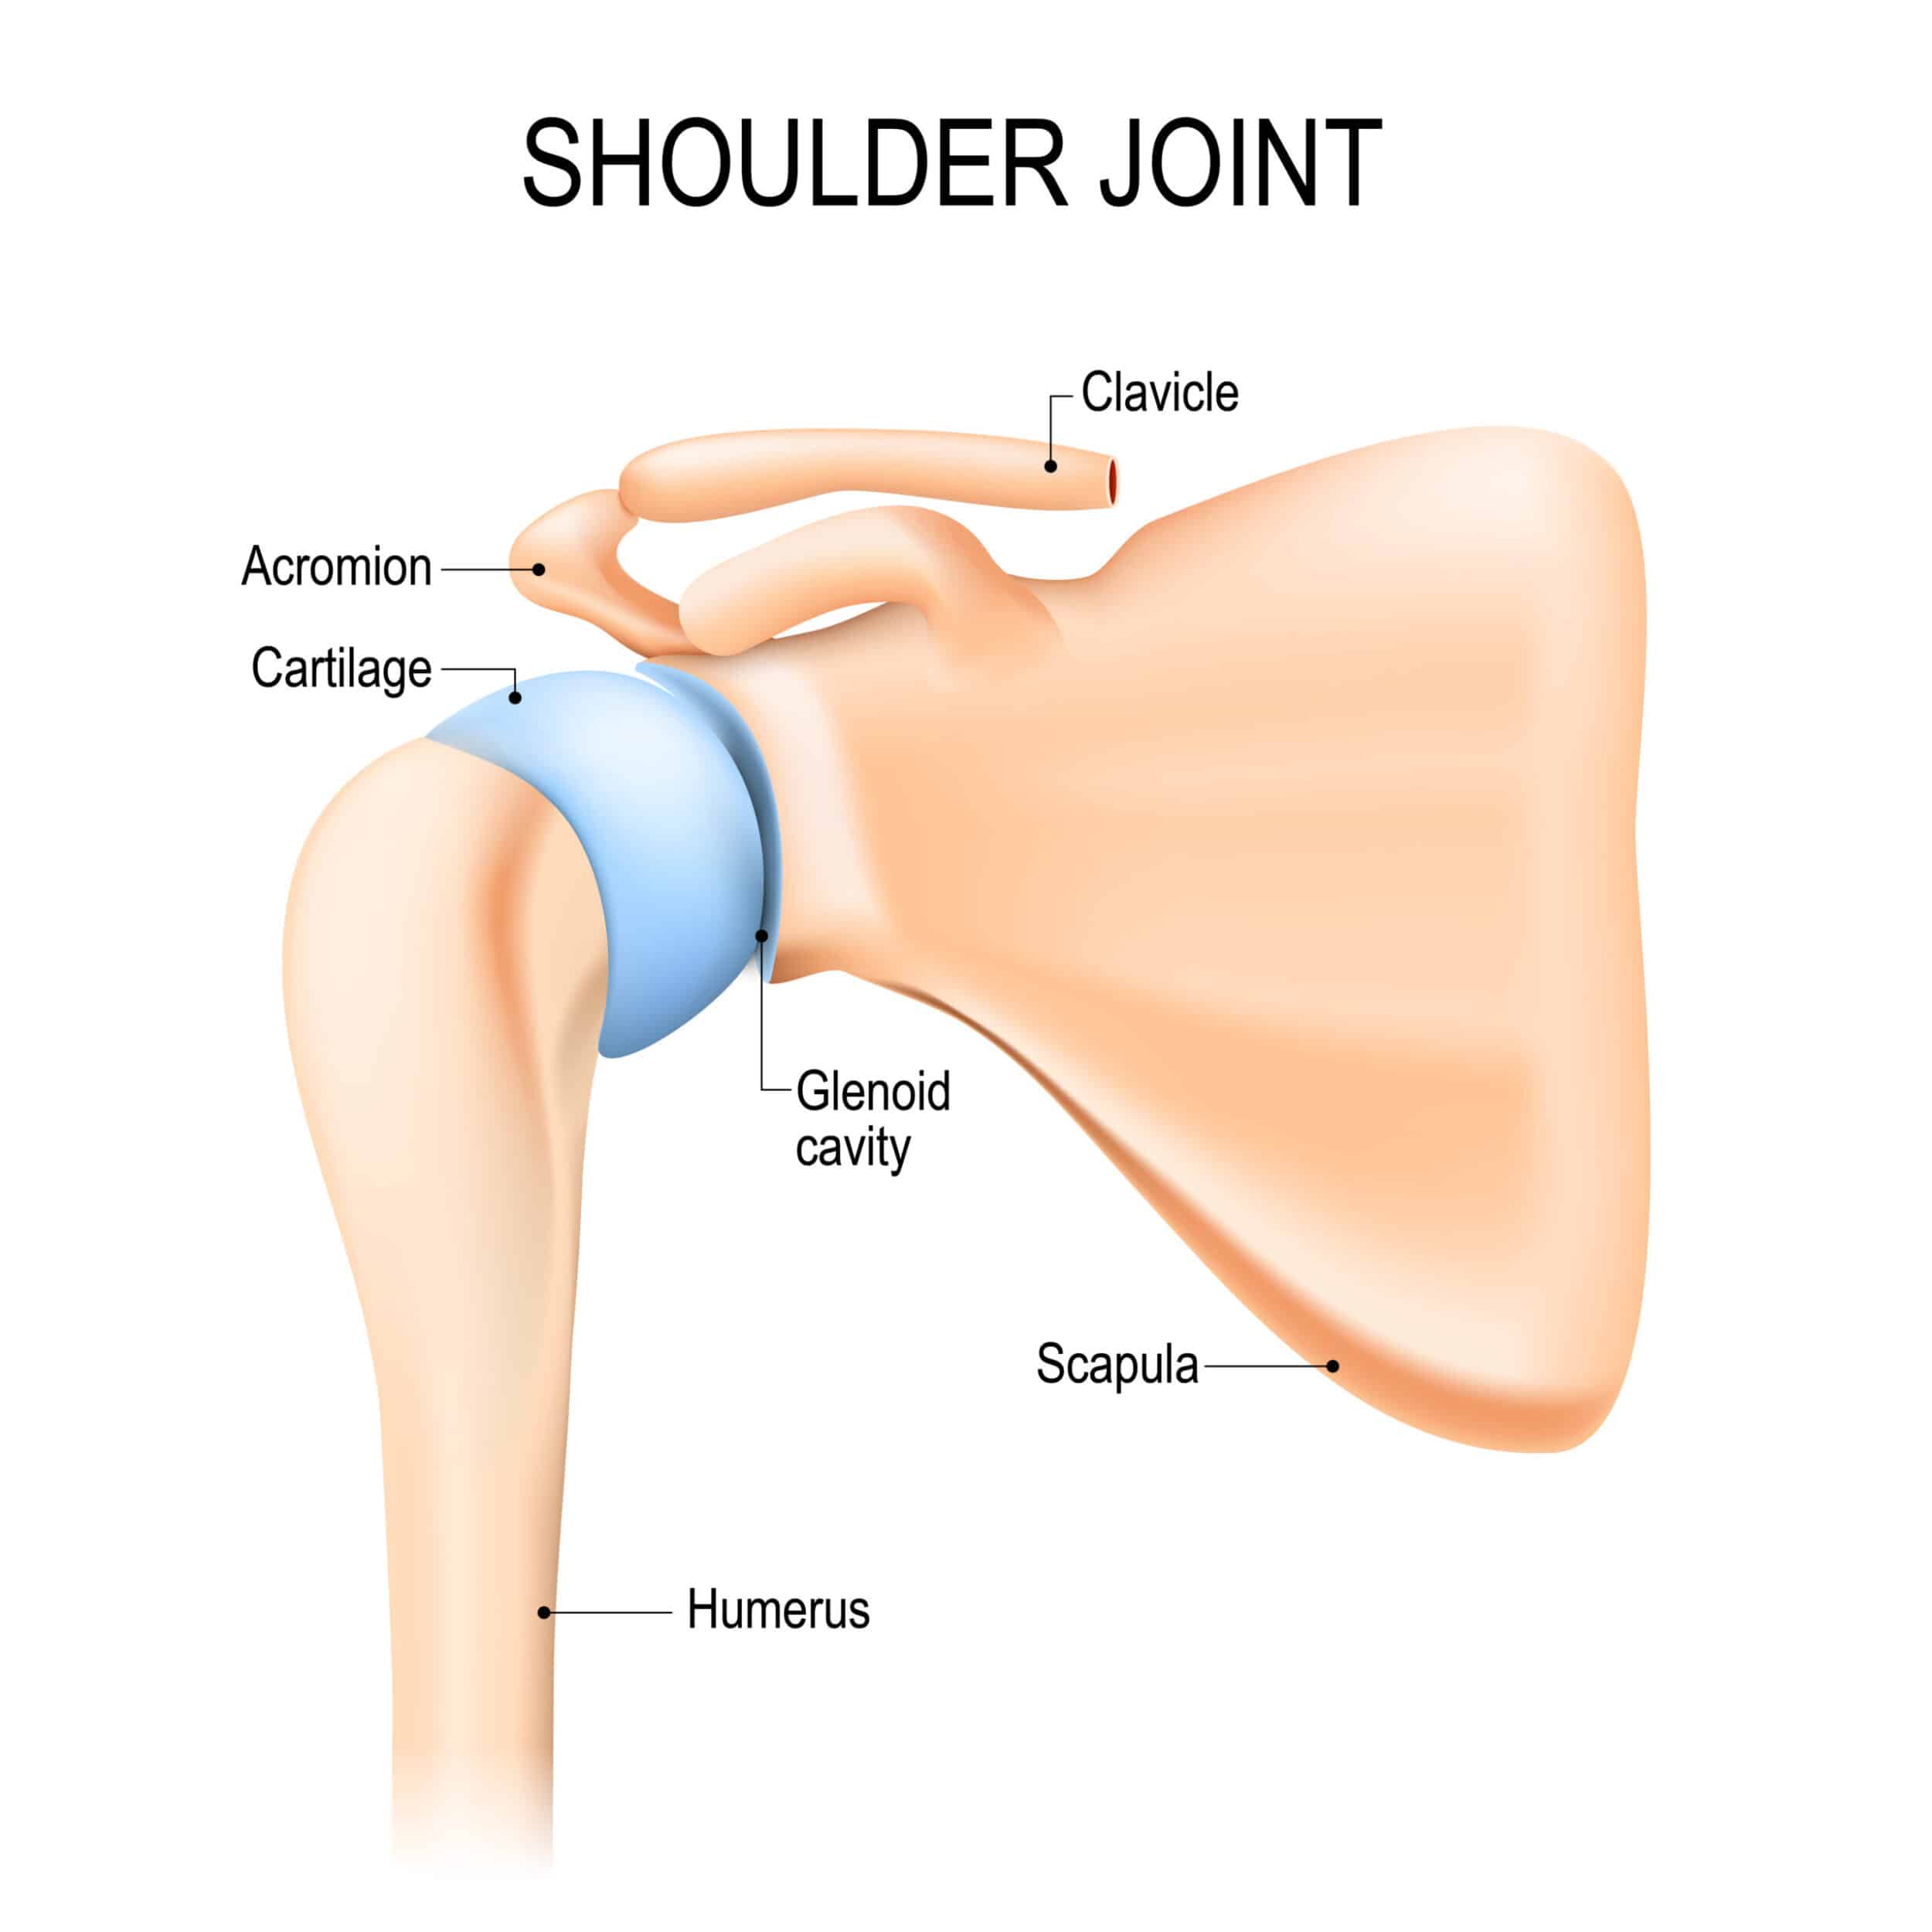 illustration of shoulder joint bone labeled with clavicle, cartilage, and scapula to represent rotator cuff injury